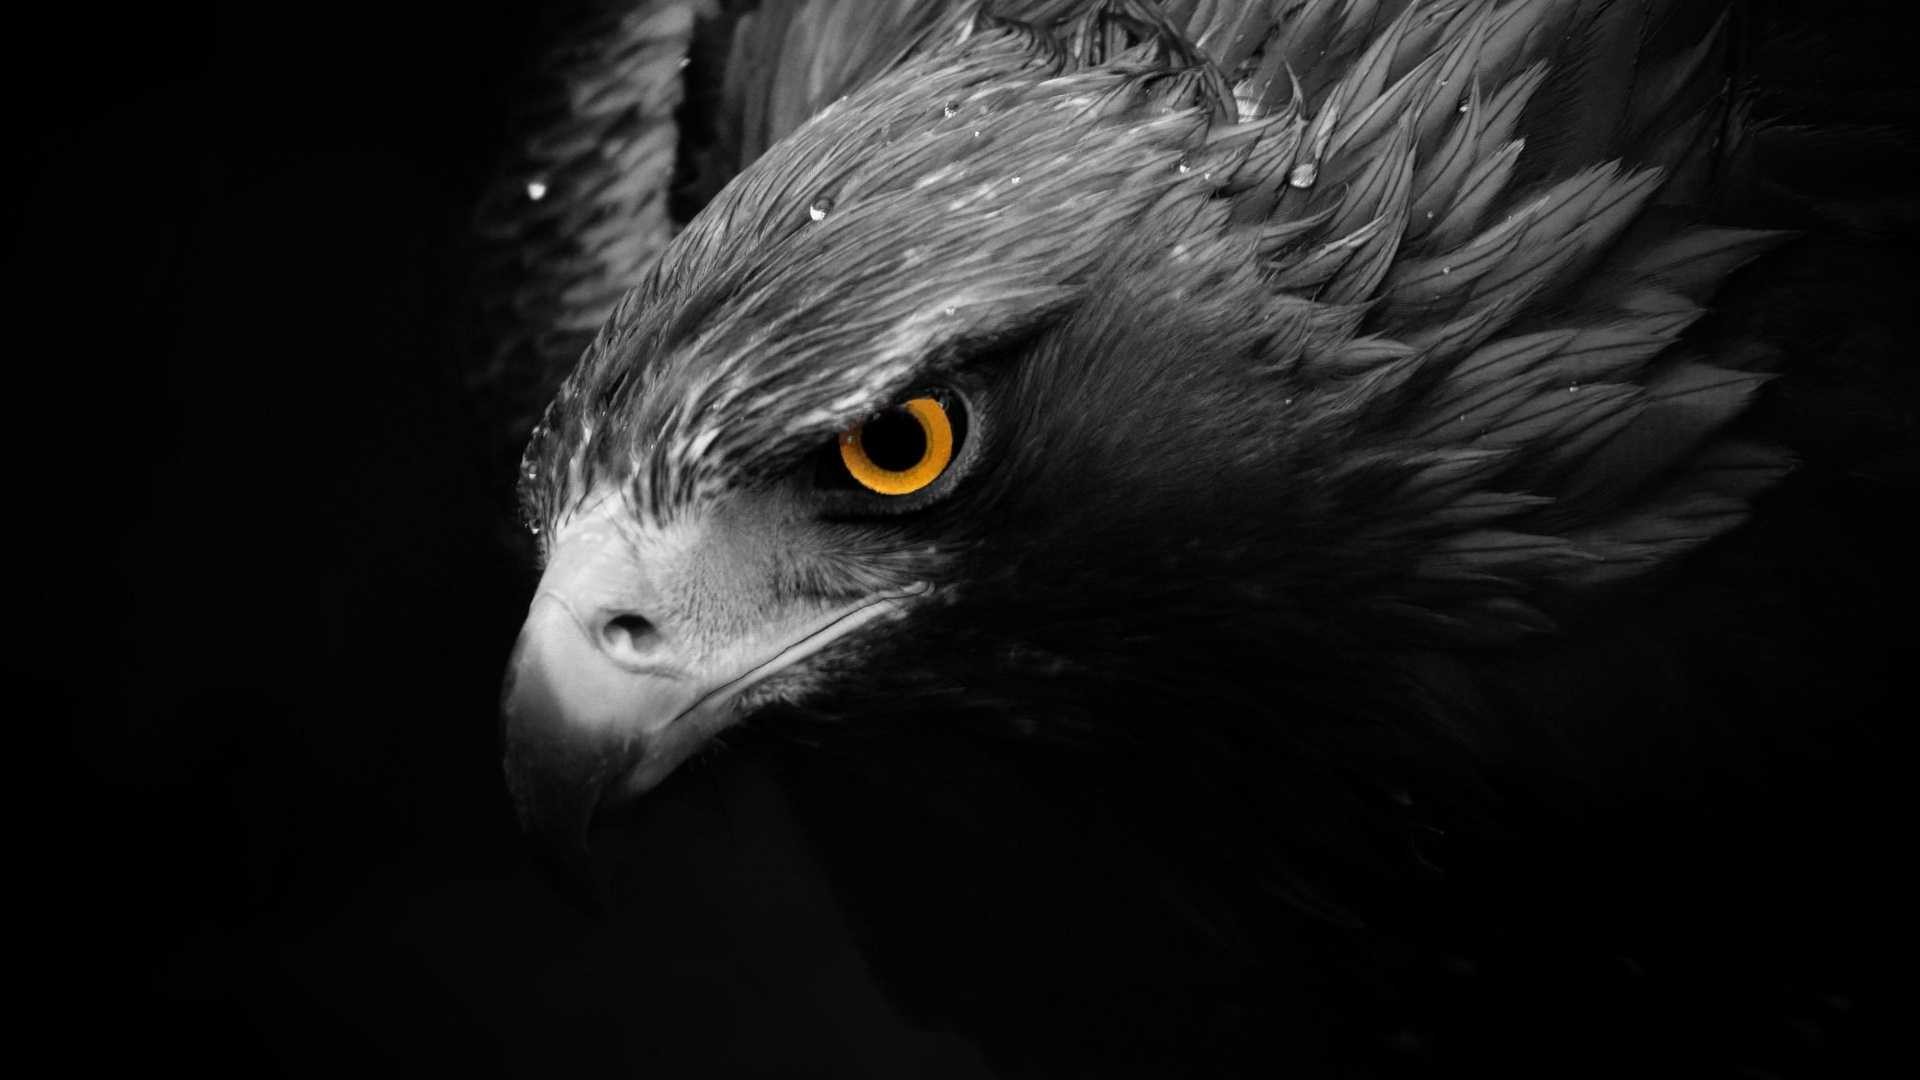 1920x1080 ... Wallpapers - Page 5 Black Eagle | Eagle, Bird and Animal ...